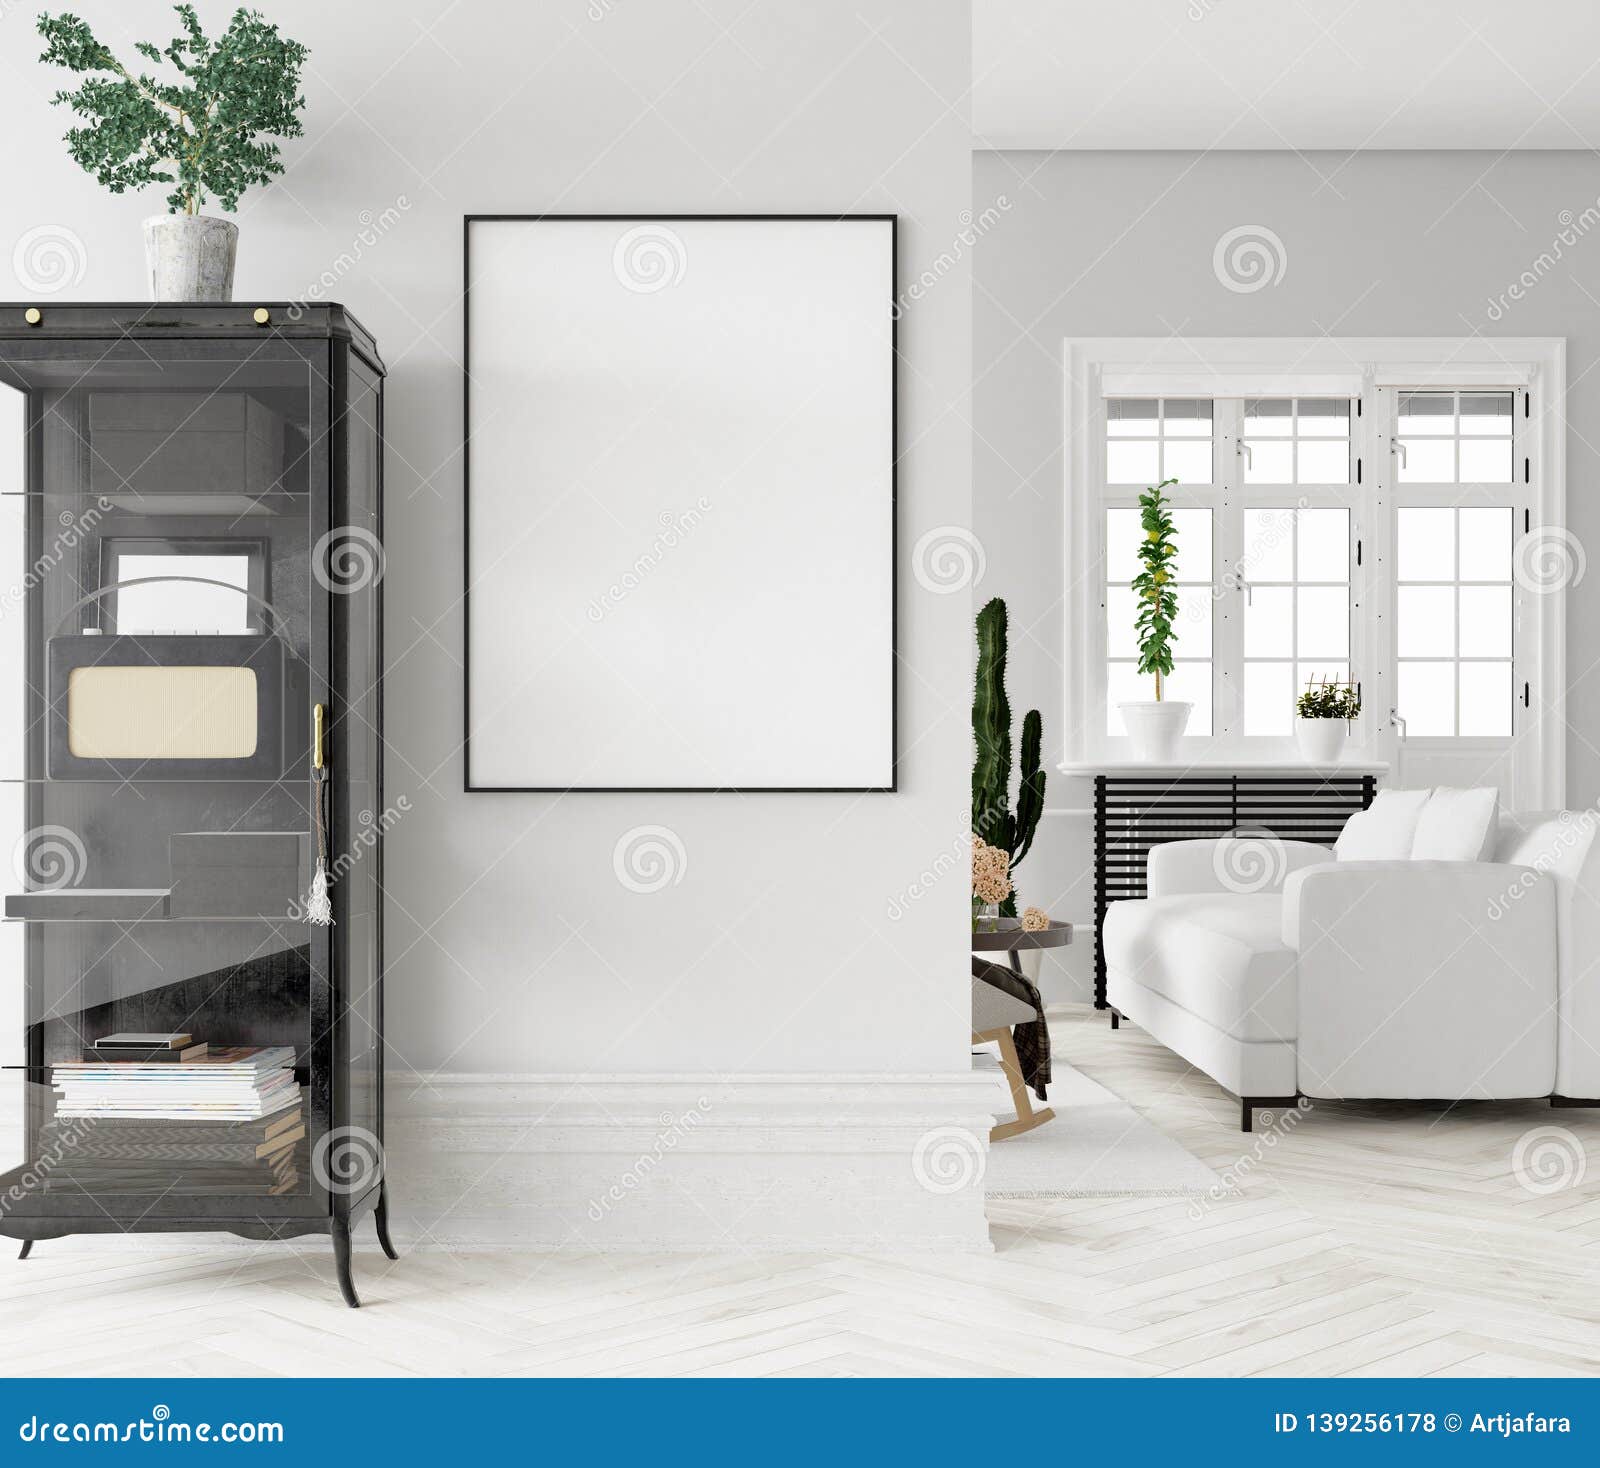 Mock Up Poster Frame in Home Interior Background Stock Photo - Image of  indoor, decor: 139256178